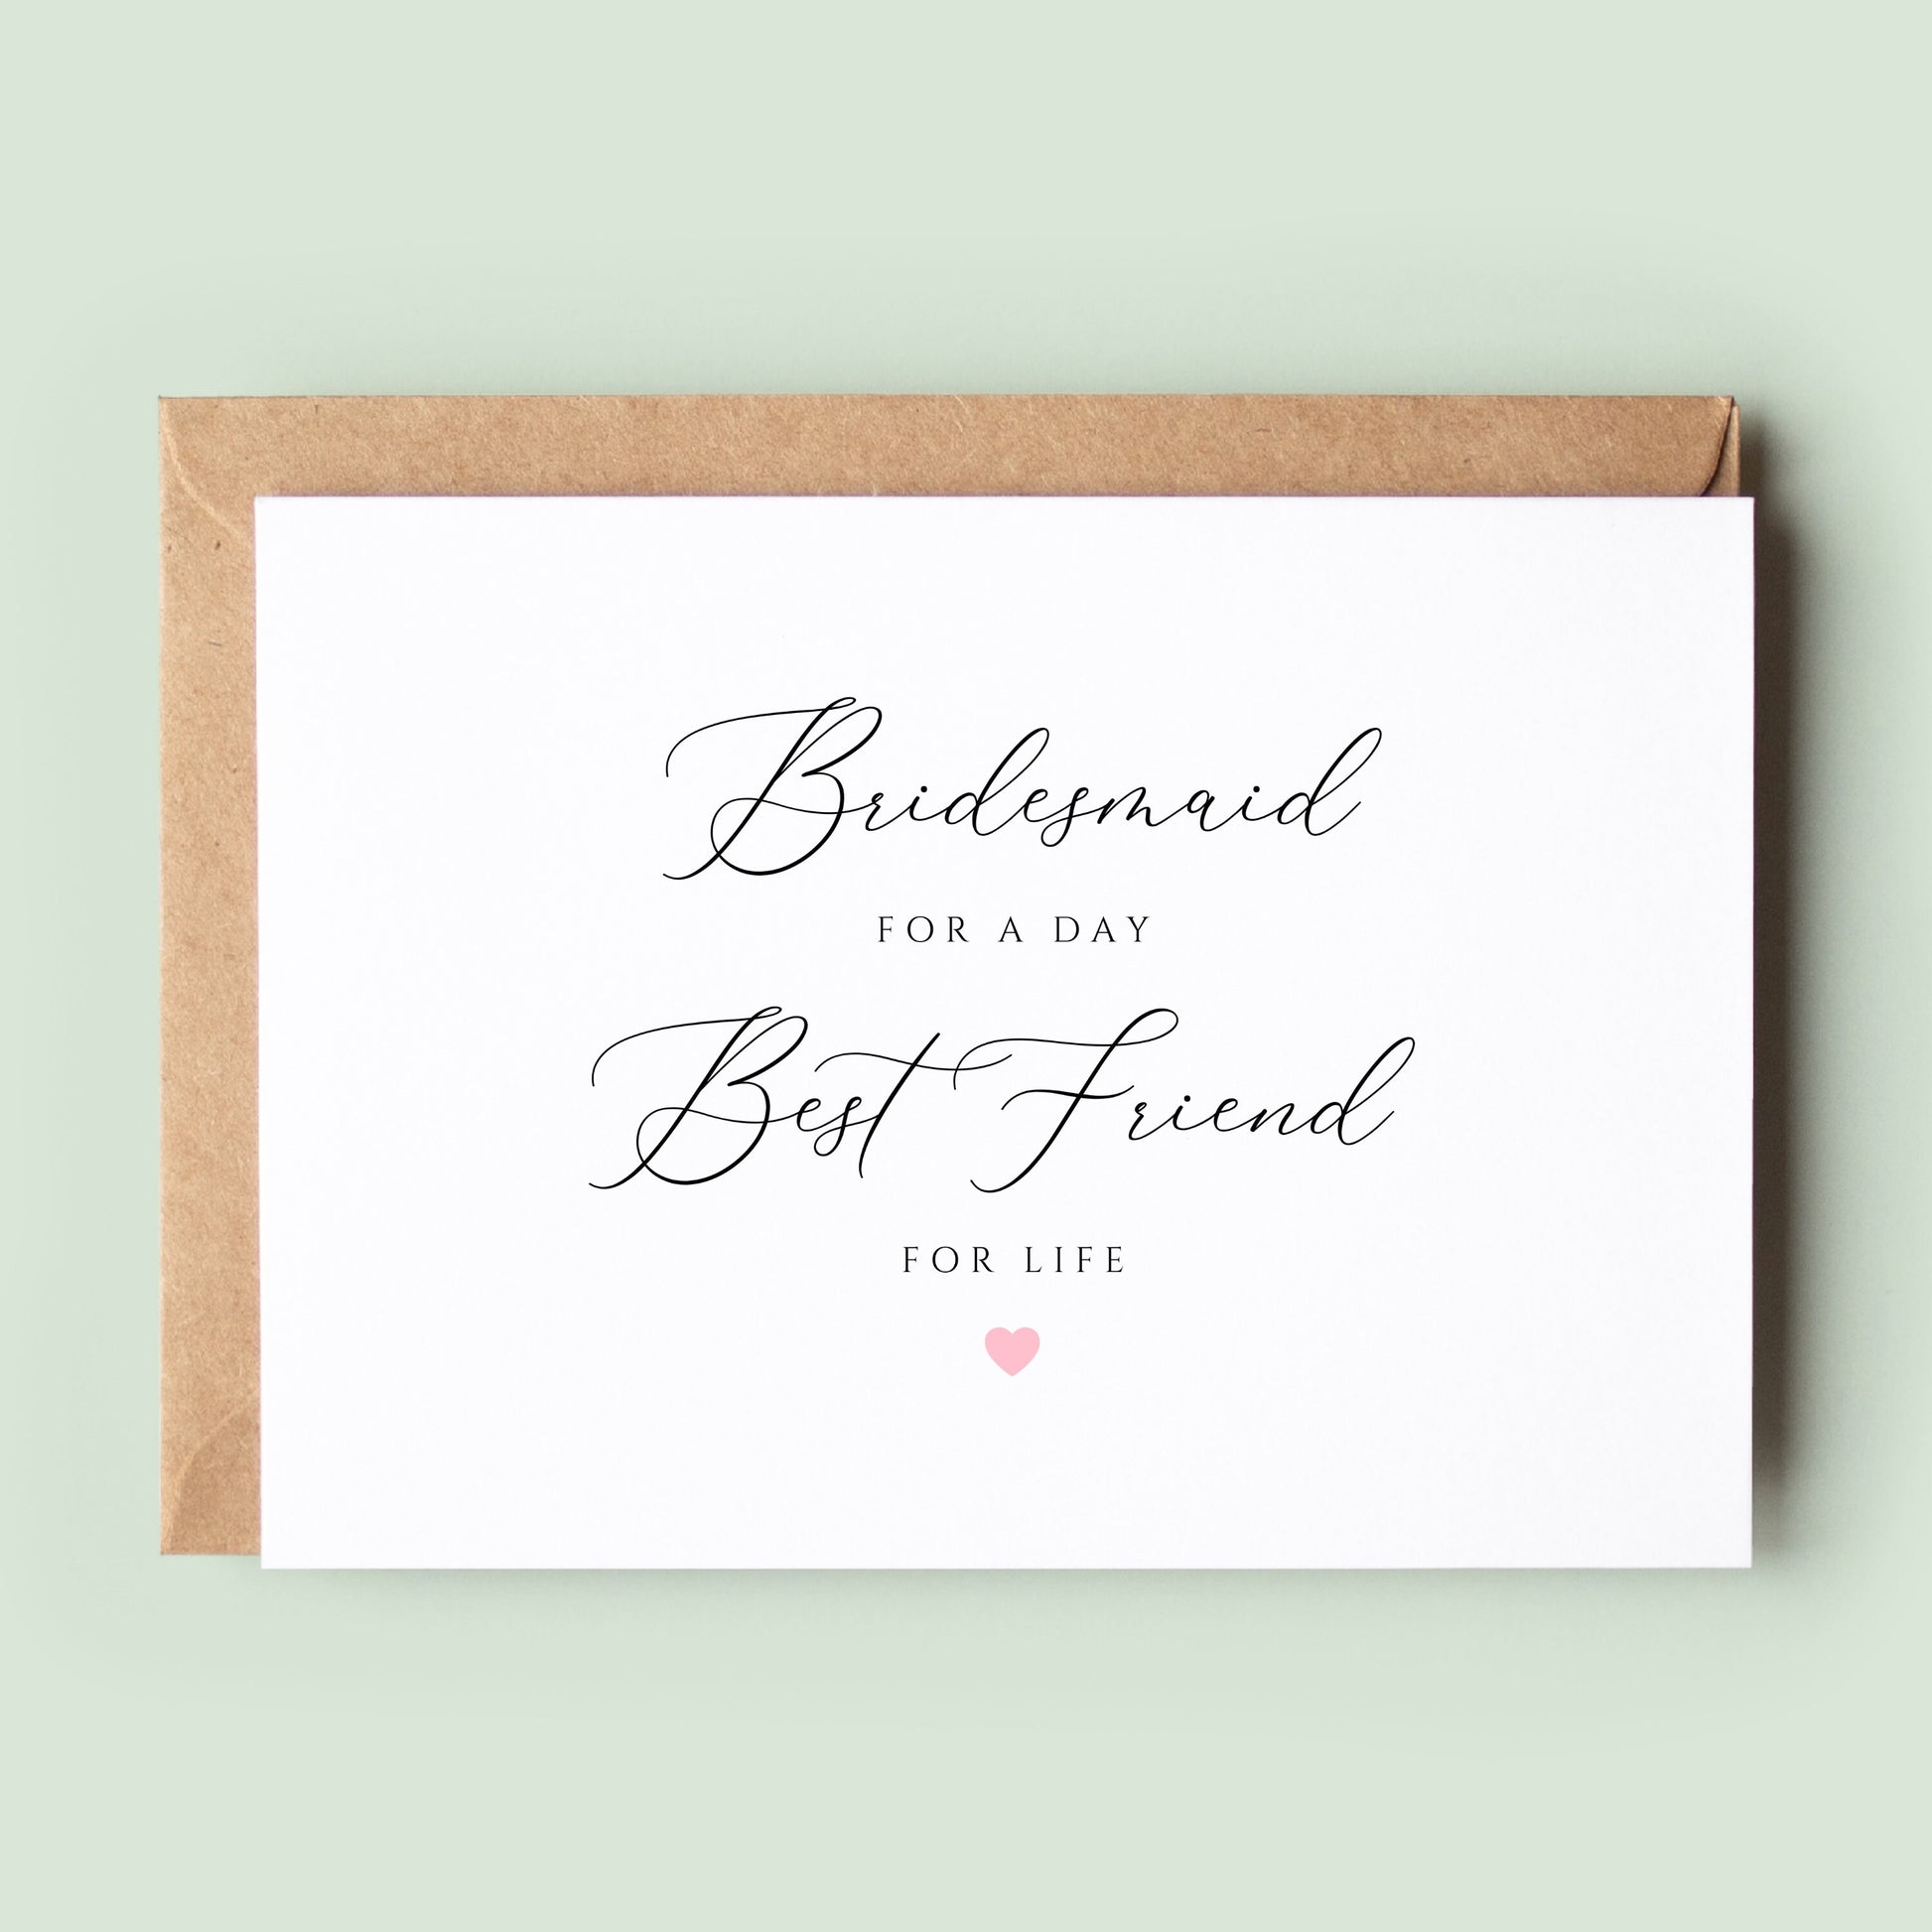 Maid of Honour for a Day, Best Friend for Life Card